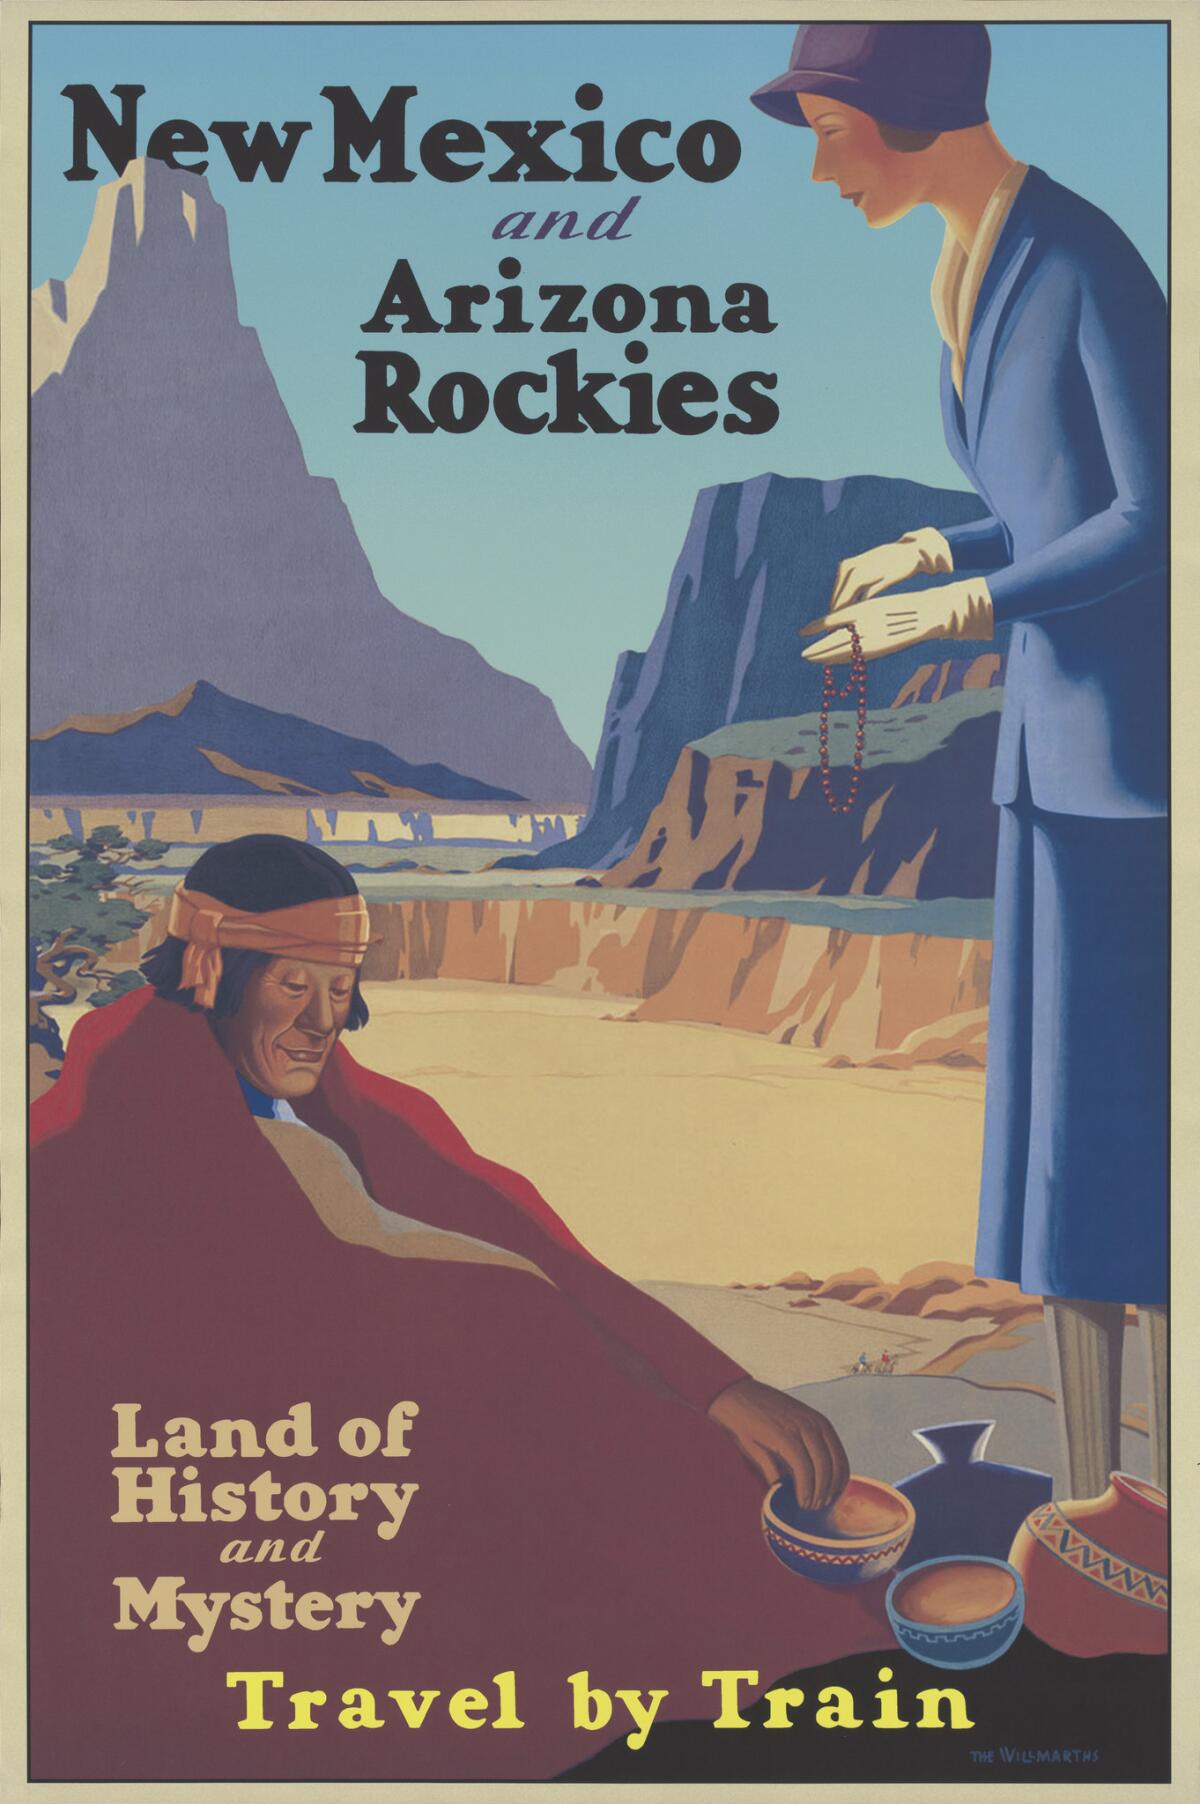 A travel poster created by the Union Pacific Railroad around 1925 plays on the mystique of Native culture for white audiences.